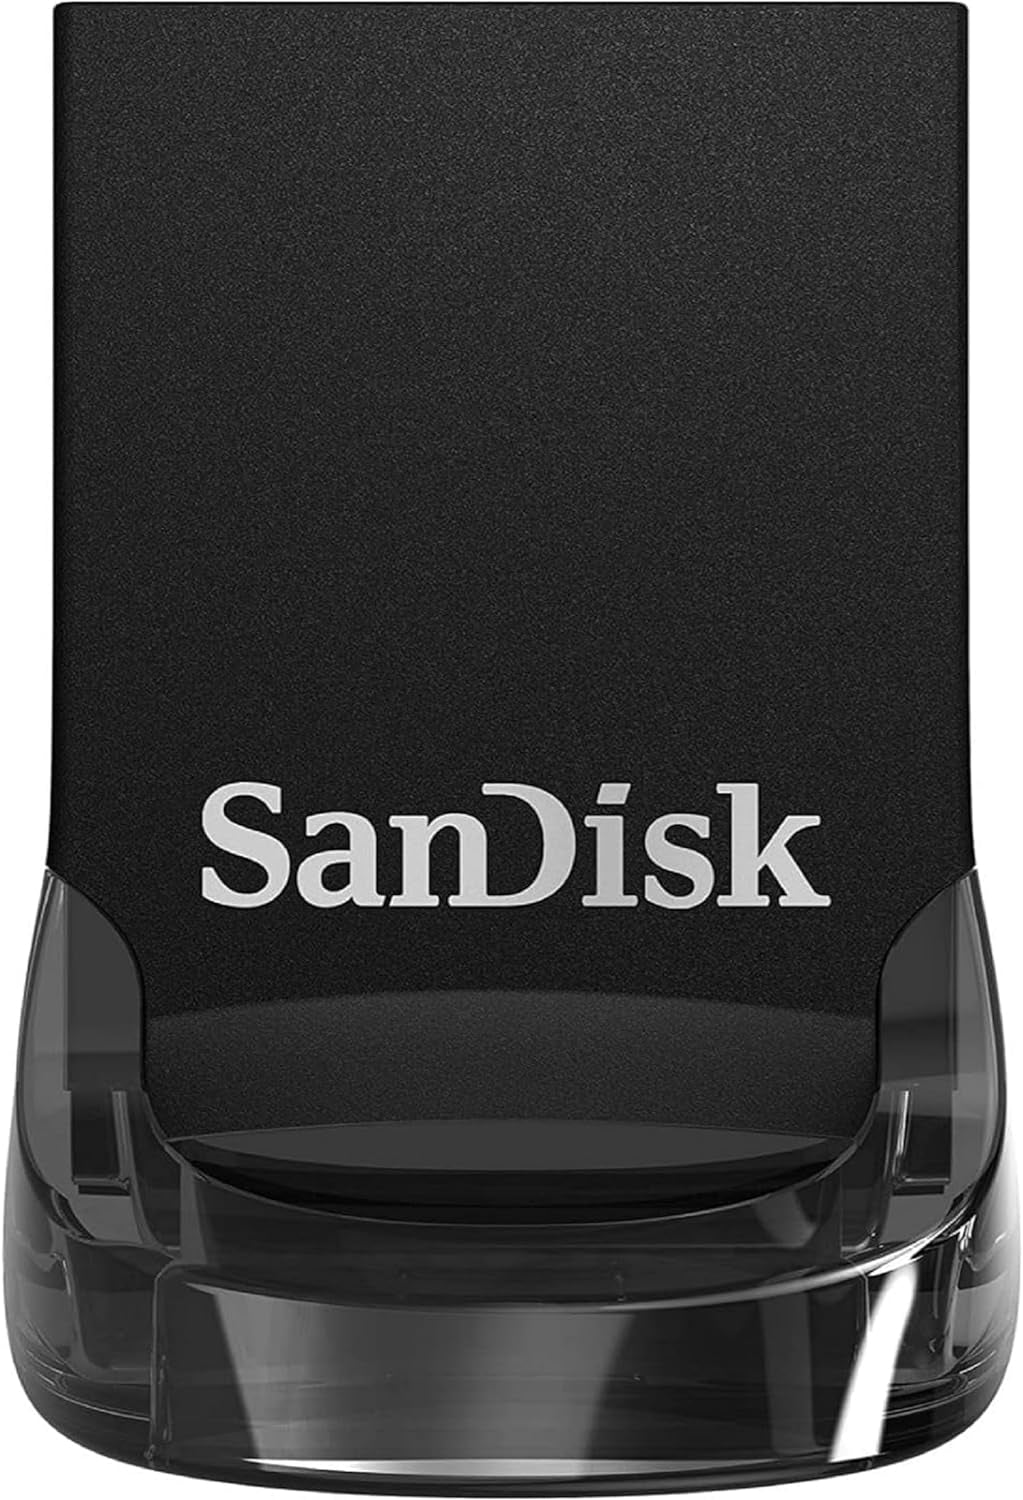 512GB Ultra Fit USB 3.2 Gen 1 Flash Drive - up to 400Mb/S, Plug-And-Stay Design - SDCZ430-512G-GAM46, Black